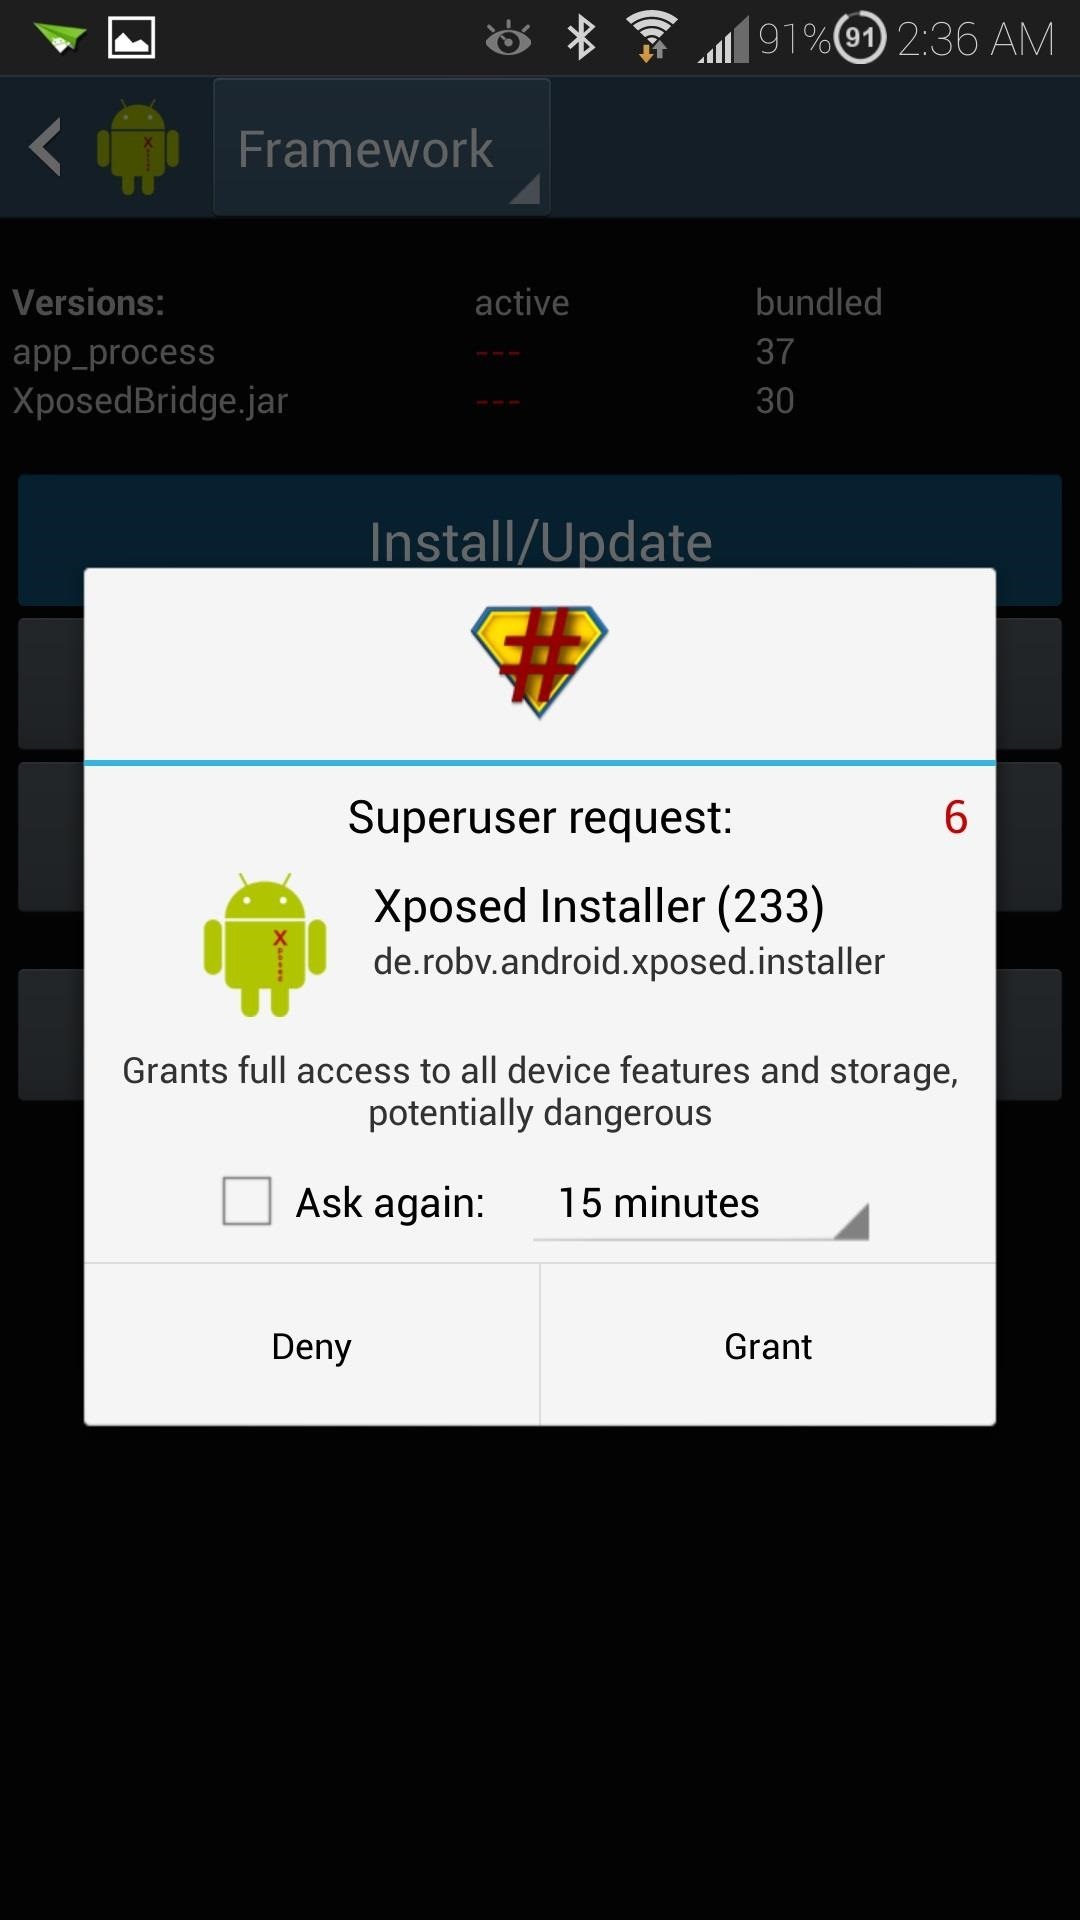 How to Install the Xposed Framework on Your Samsung Galaxy S4 for Quick & Easy softModding